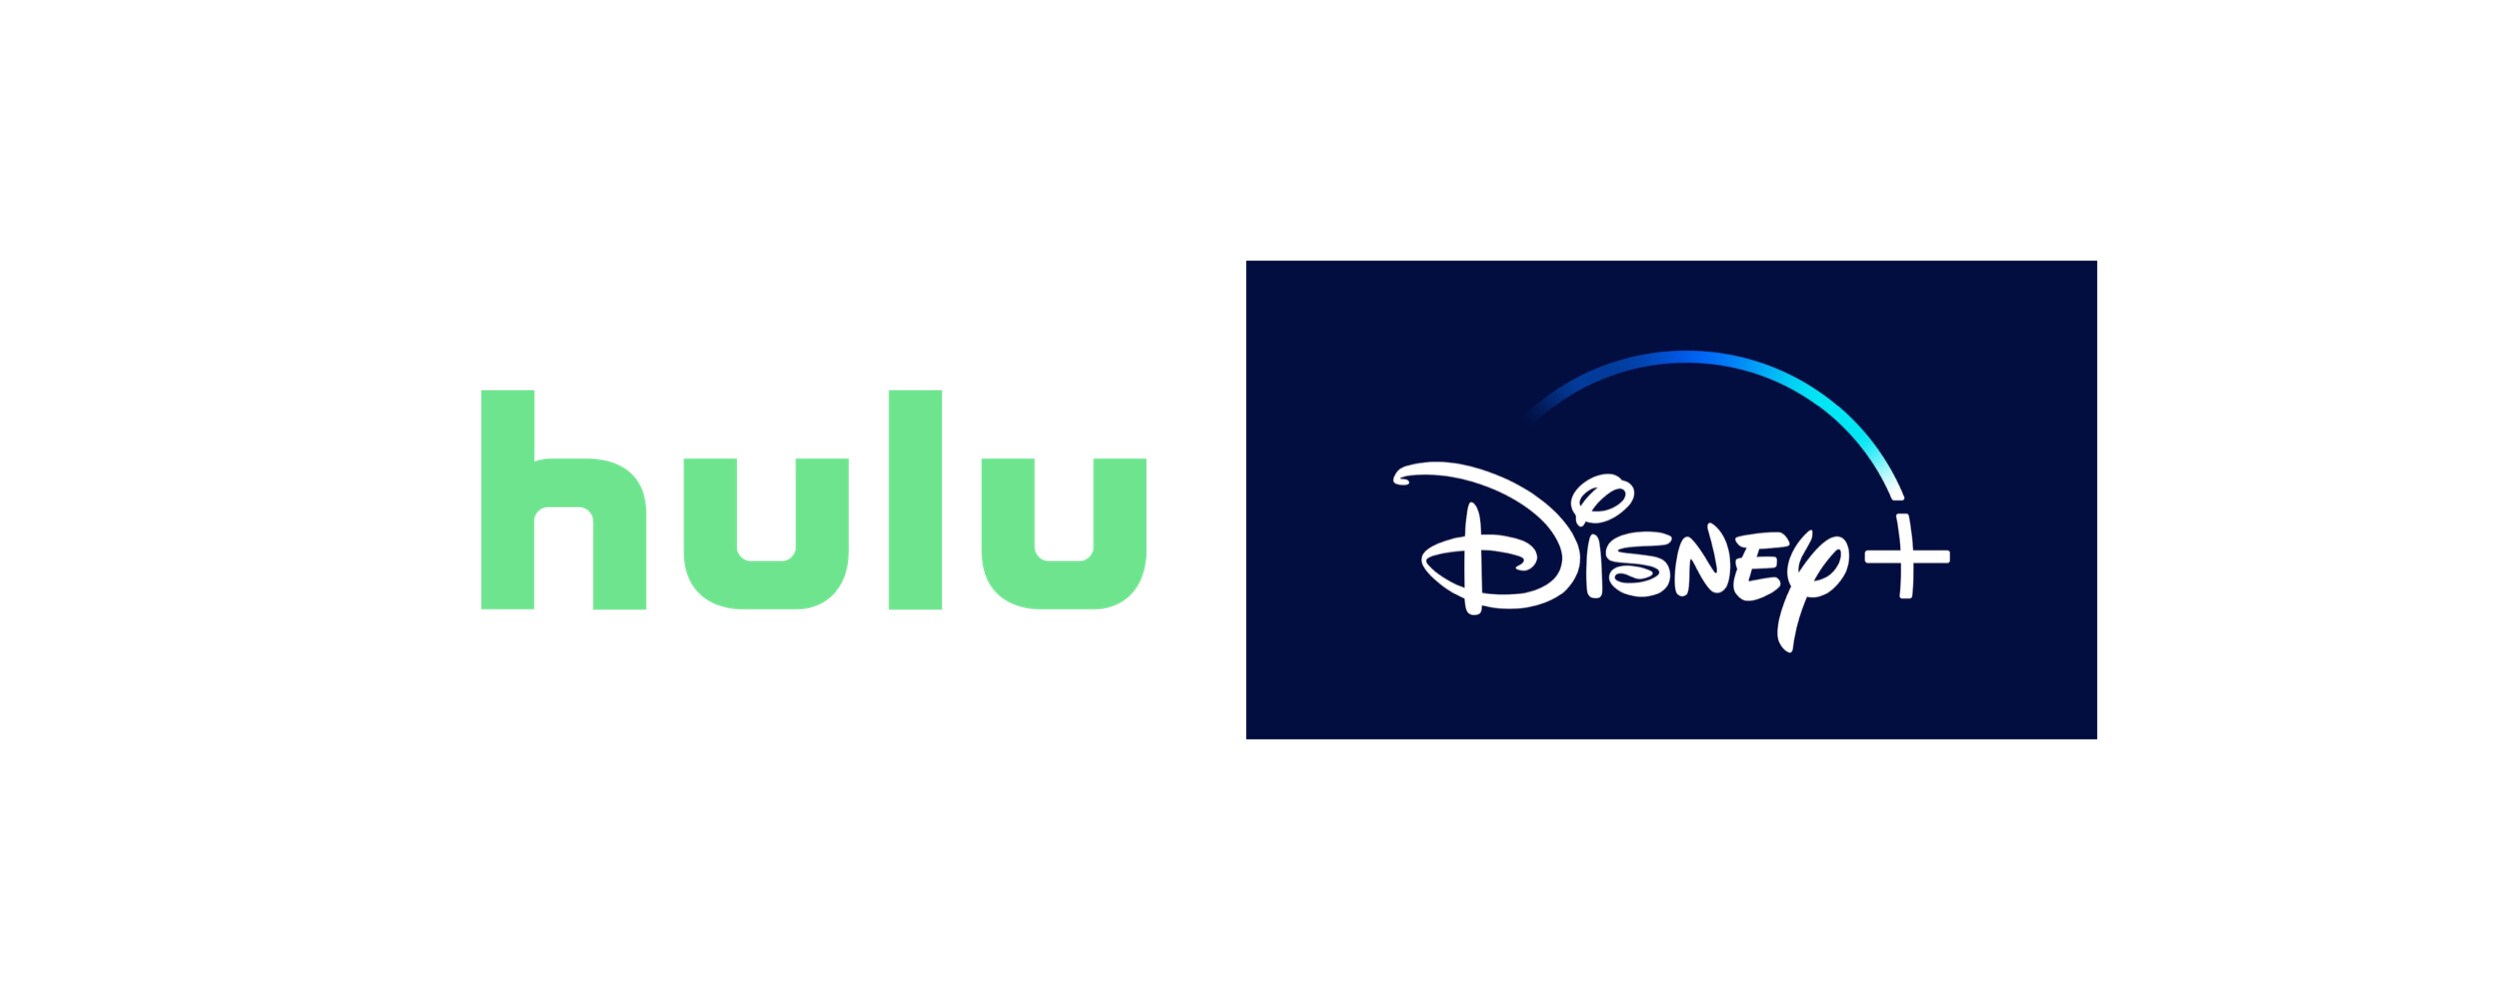 Hulu’s Huluween And Disney+’s Hallowstream Are The Perfect Pair For